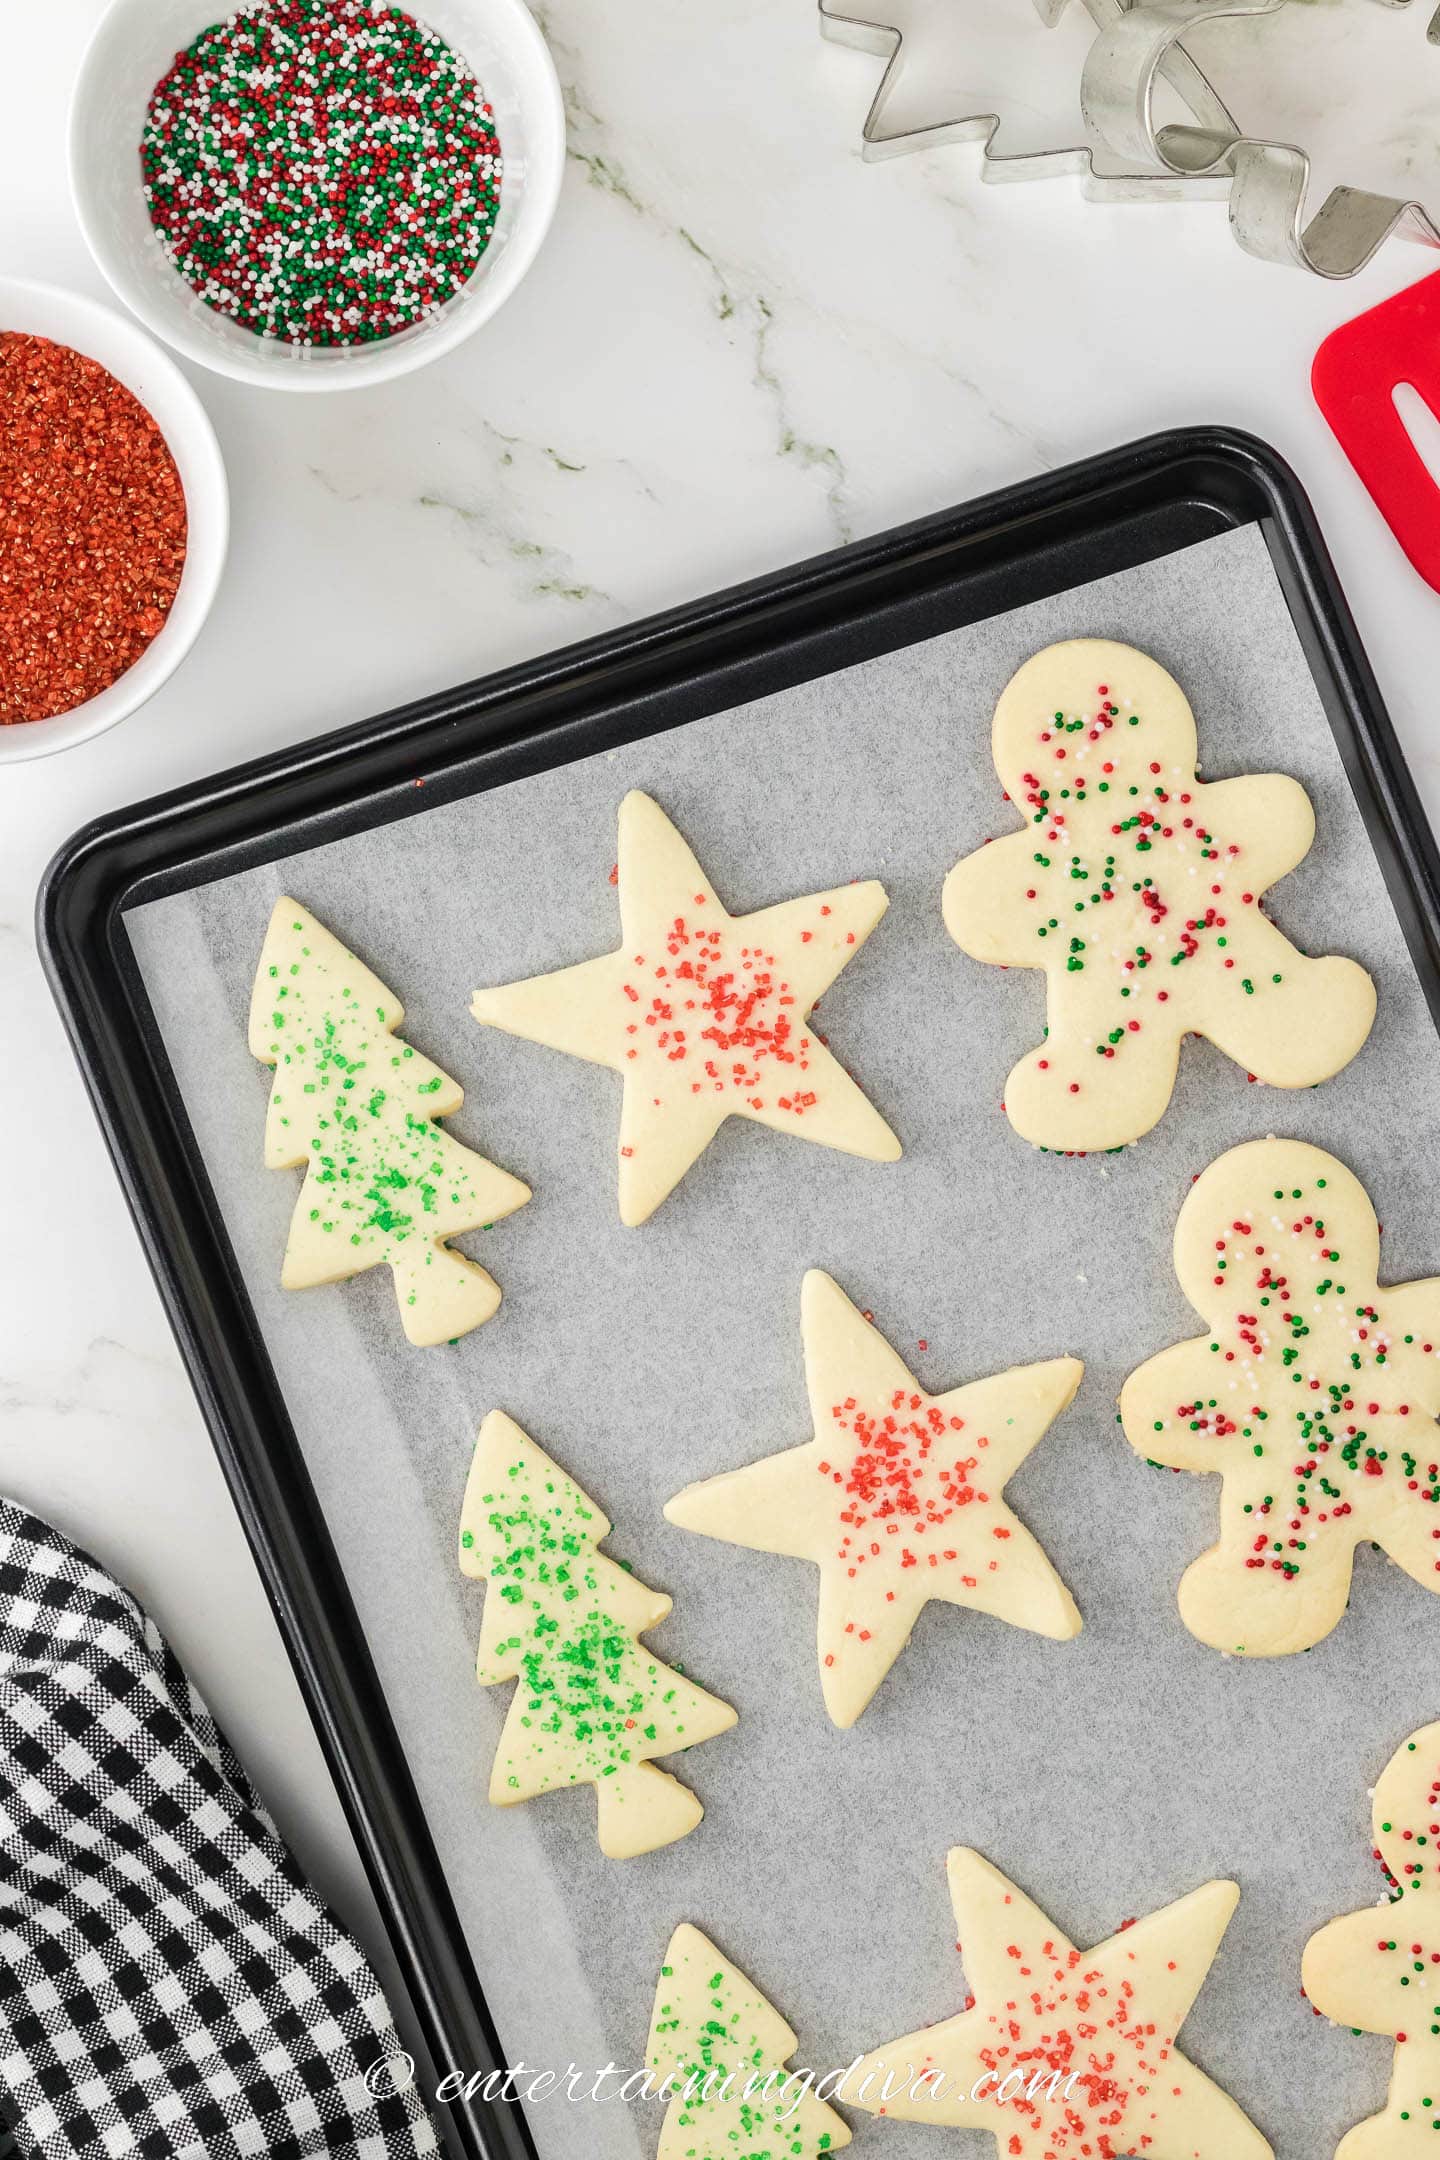 baked cut out shortbread cookies with sprinkles on a baking sheet